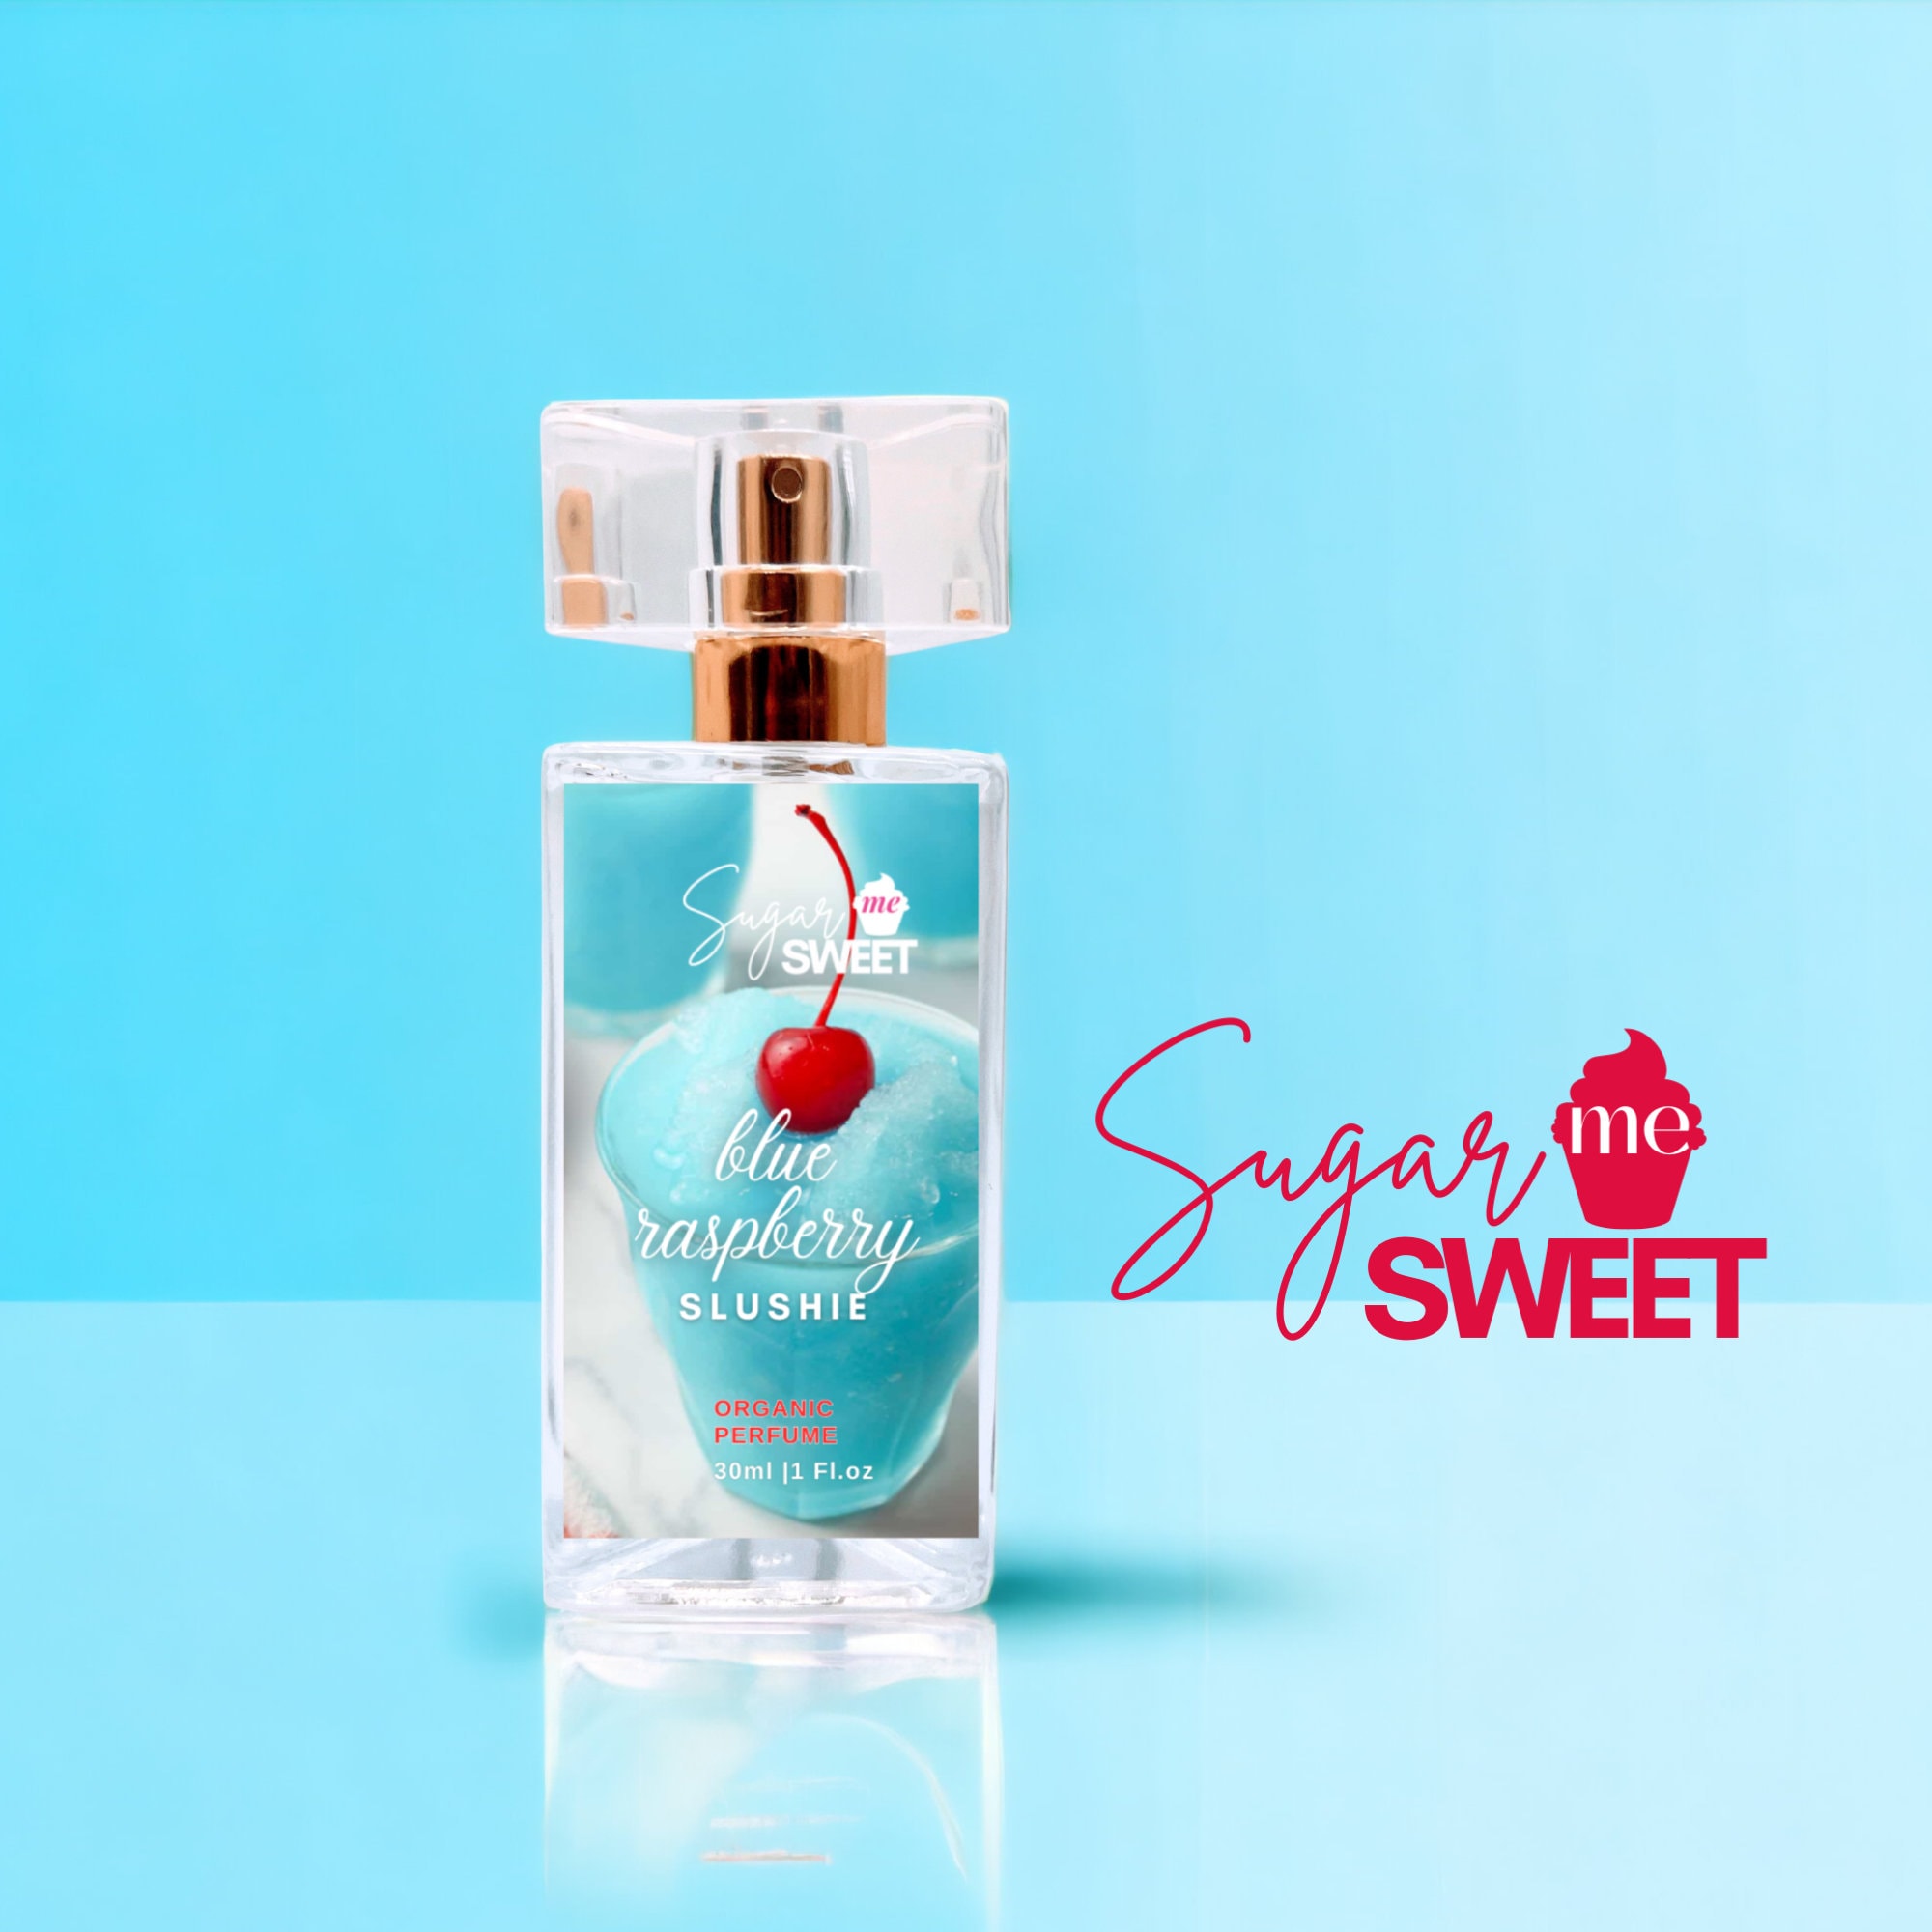 Strawberry Perfume Sweet, Slightly Sour Strawberry Pulp Flavor